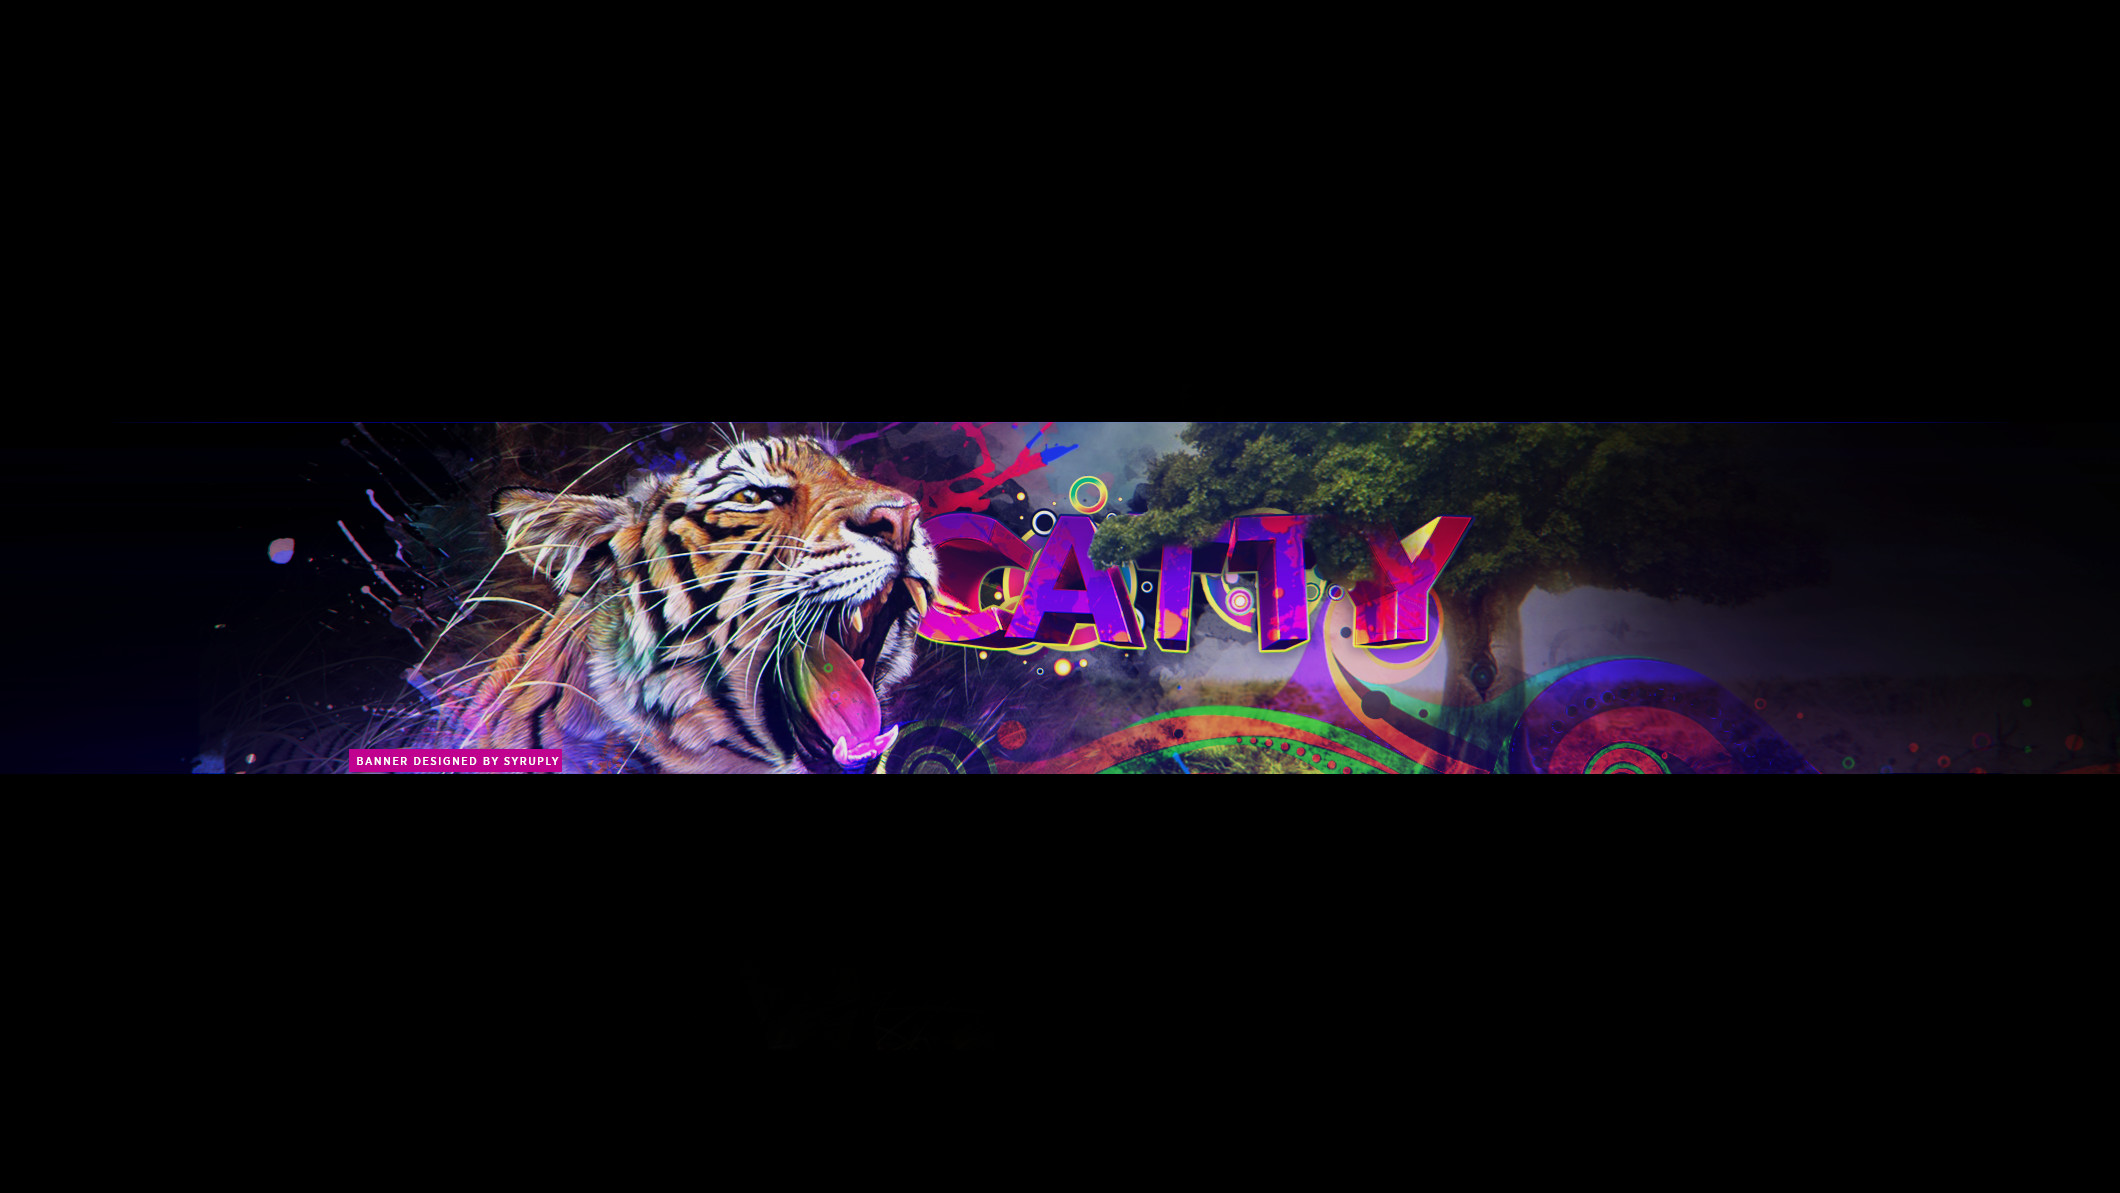 2120x1193 ... Catty YouTube Banner (client) by Syruply